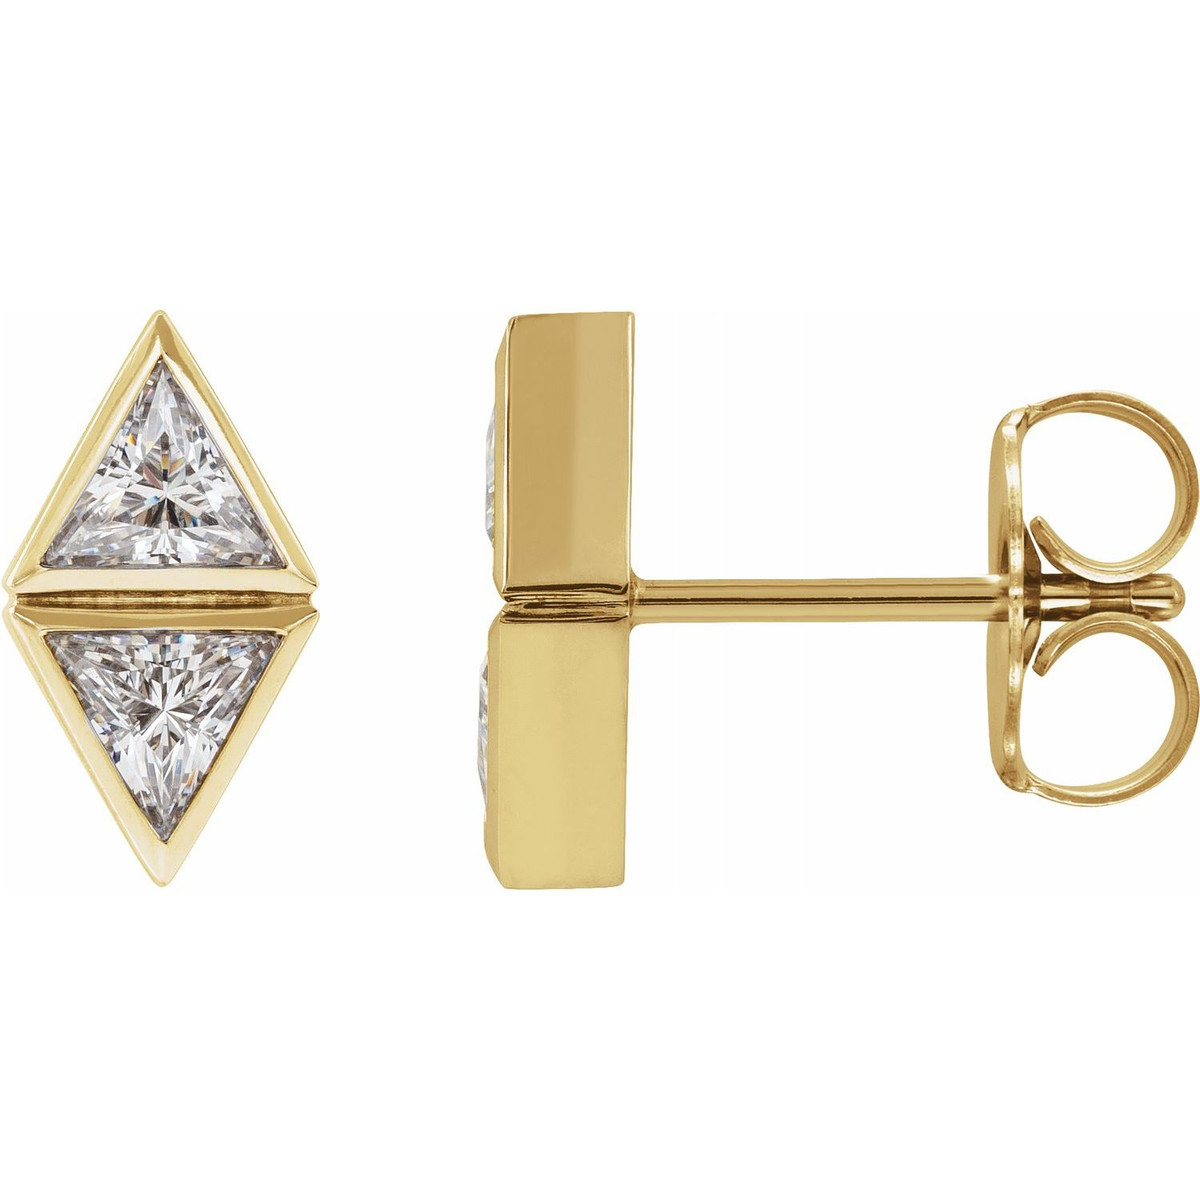 Hyde Park Collection 14K Yellow Gold Stud Diamond Earrings-26050 Product Image